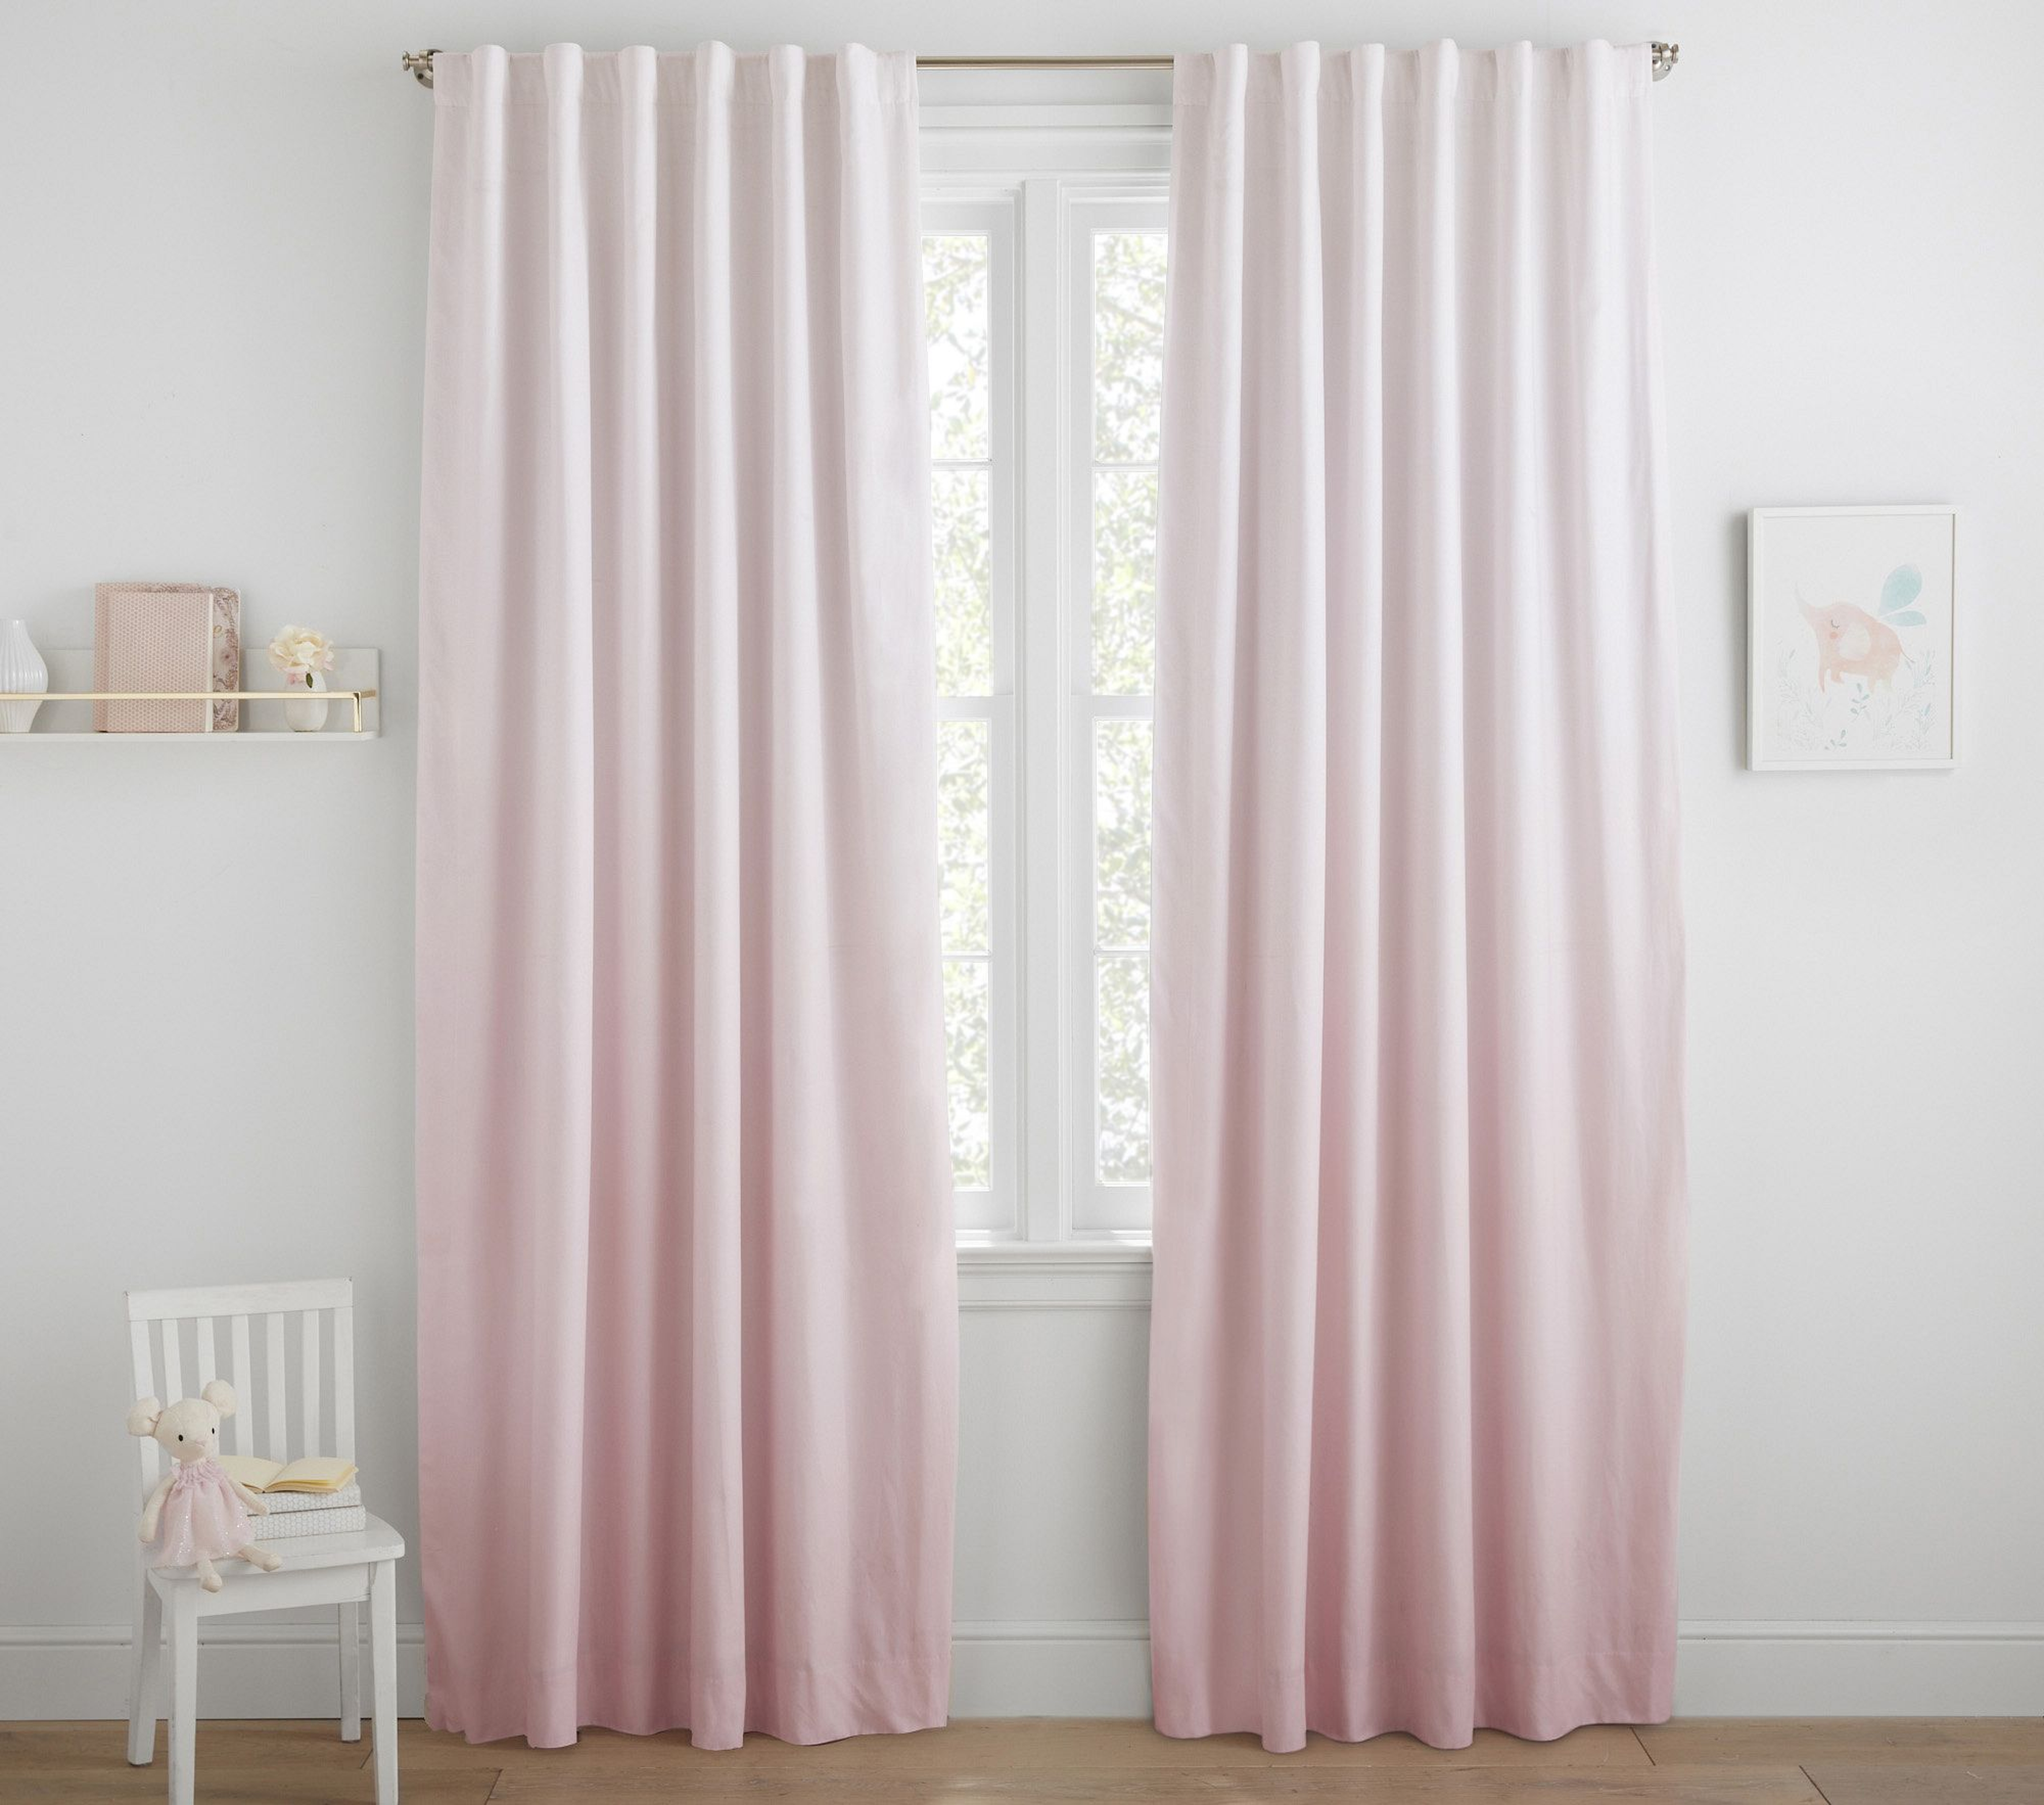 Ombre Blackout Curtain Panel - Pottery Barn Kids